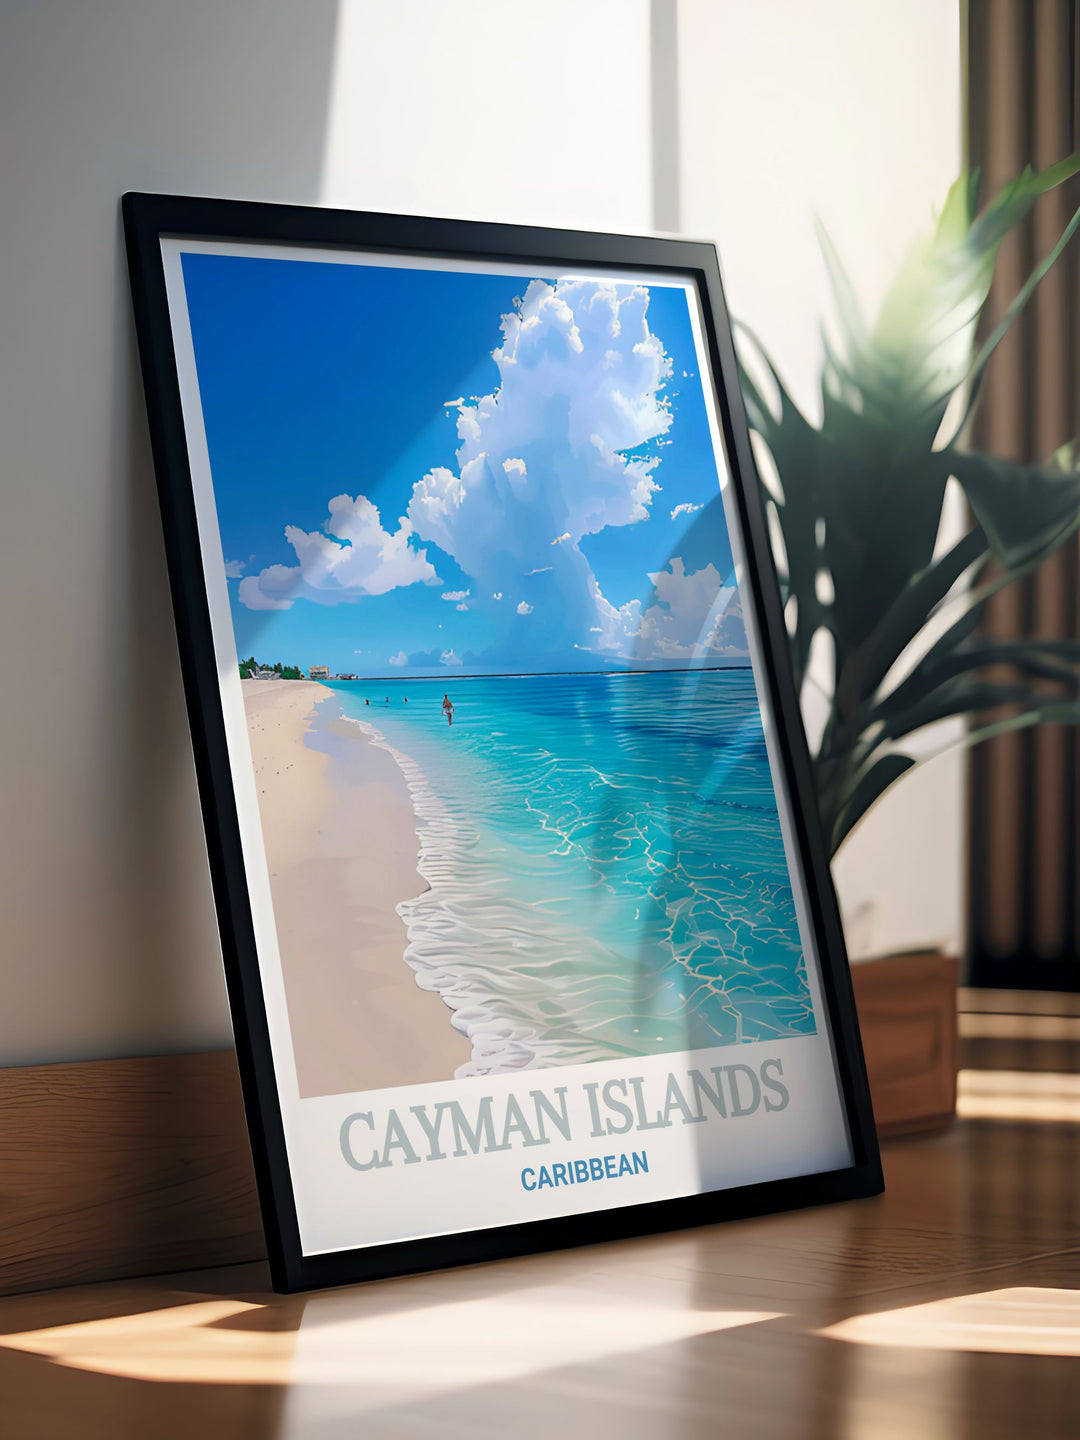 Elegant Seven Mile Beach artwork in a vintage style capturing the lush beauty of the Cayman Islands perfect for enhancing any room with its charming black and white aesthetic and ideal as an anniversary or birthday gift